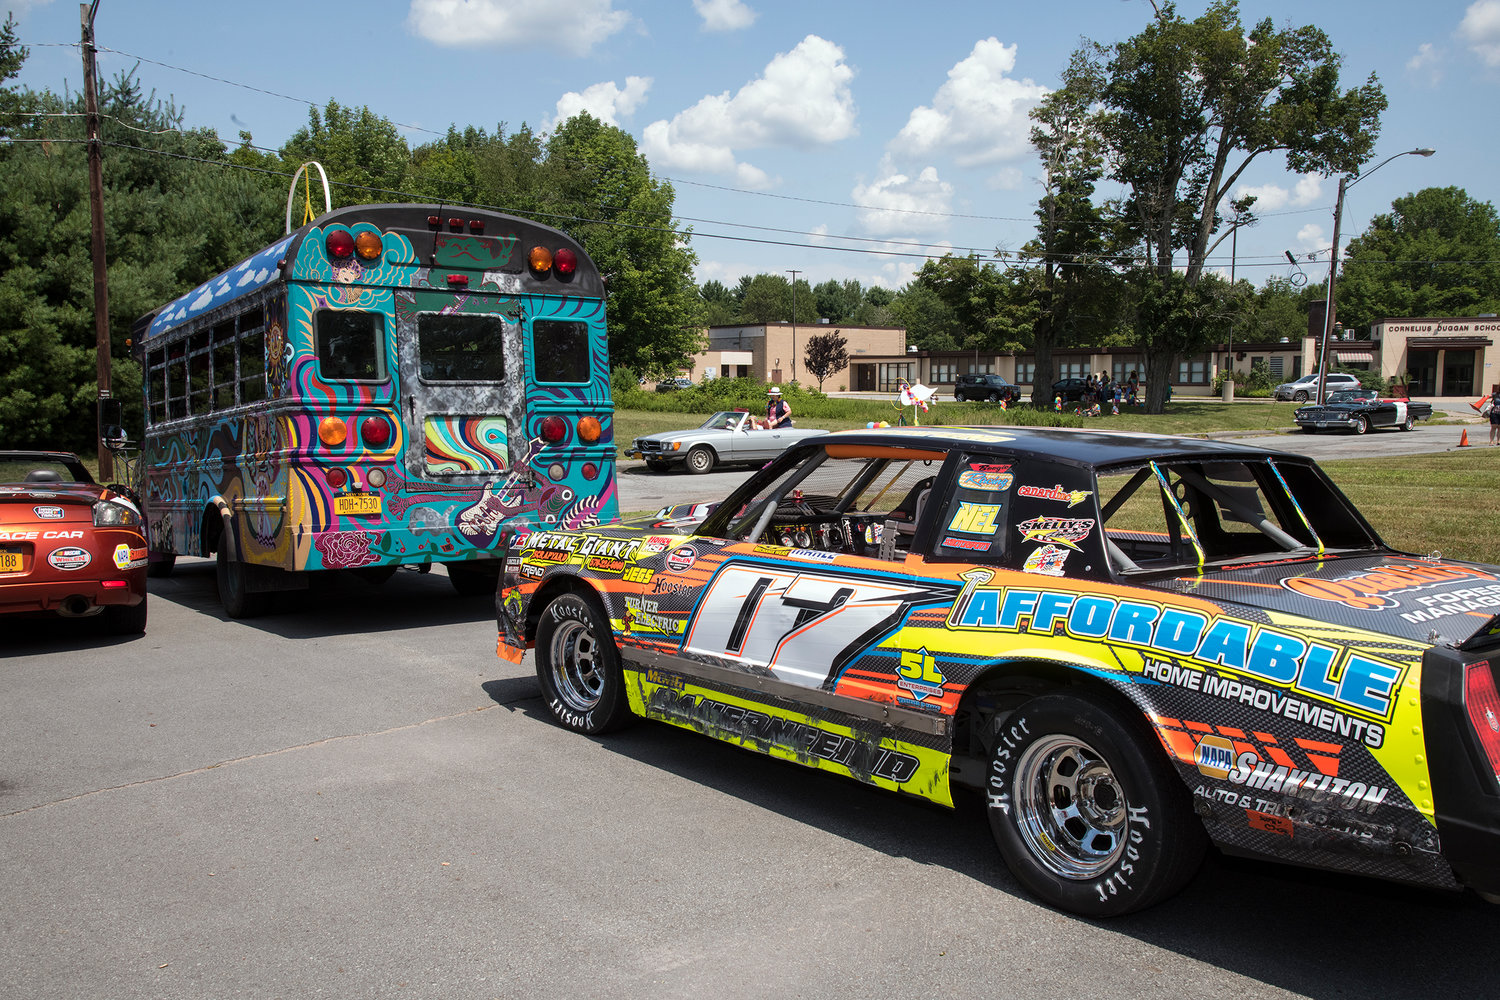 Not to be outdone, parade participants also brought beautifully and eccentrically painted Peace vans and racecars.